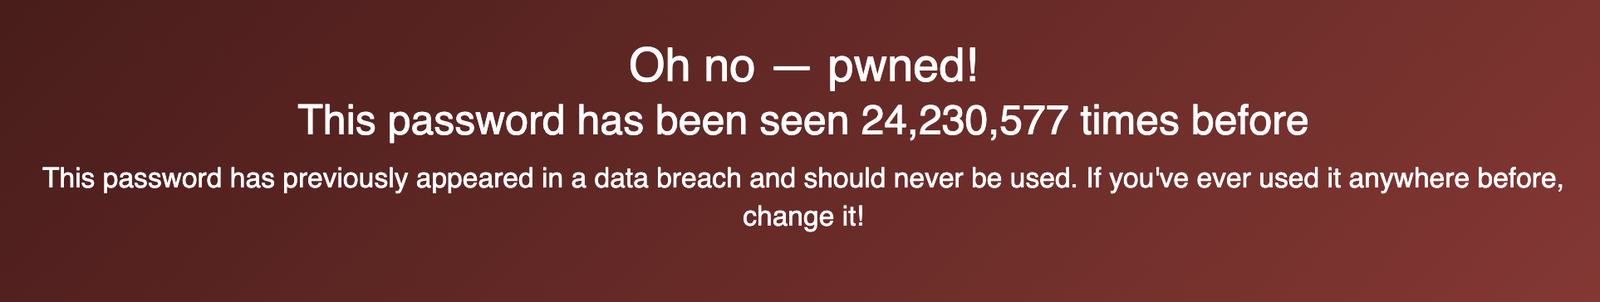 Oh no - pwned! The password '123456' has been seen 24,230,577 times before. This password has previously appeared in a data breach and should never be used. If you've used it anywhere before, change it!.